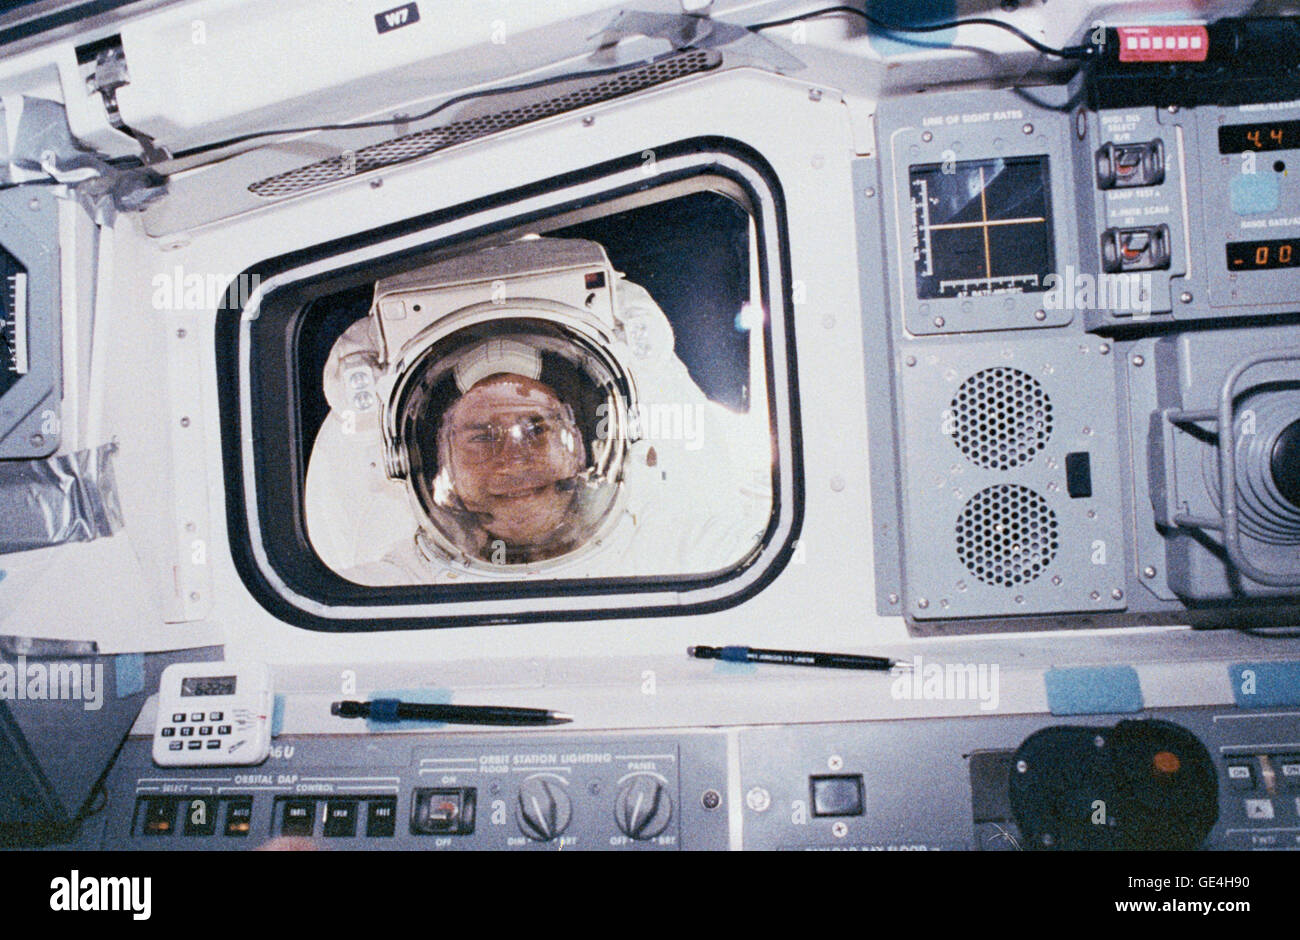 Rick Hieb, a Mission Specialist aboard STS-49, looks into the aft flight deck of the orbiter during his spacewalk. STS-49, which launched on May 7, 1992 and returned:to Earth on May 16, 1992, marked the first flight of Endeavour and the first shuttle mission to feature four EVAs. Hieb, along with fellow astronauts Pierre Thuot and Thomas Akers helped to recover INTELSAT VI, a communications satellite whose orbit had become unstable.   Image #:  Date: May 12, 1992 Stock Photo